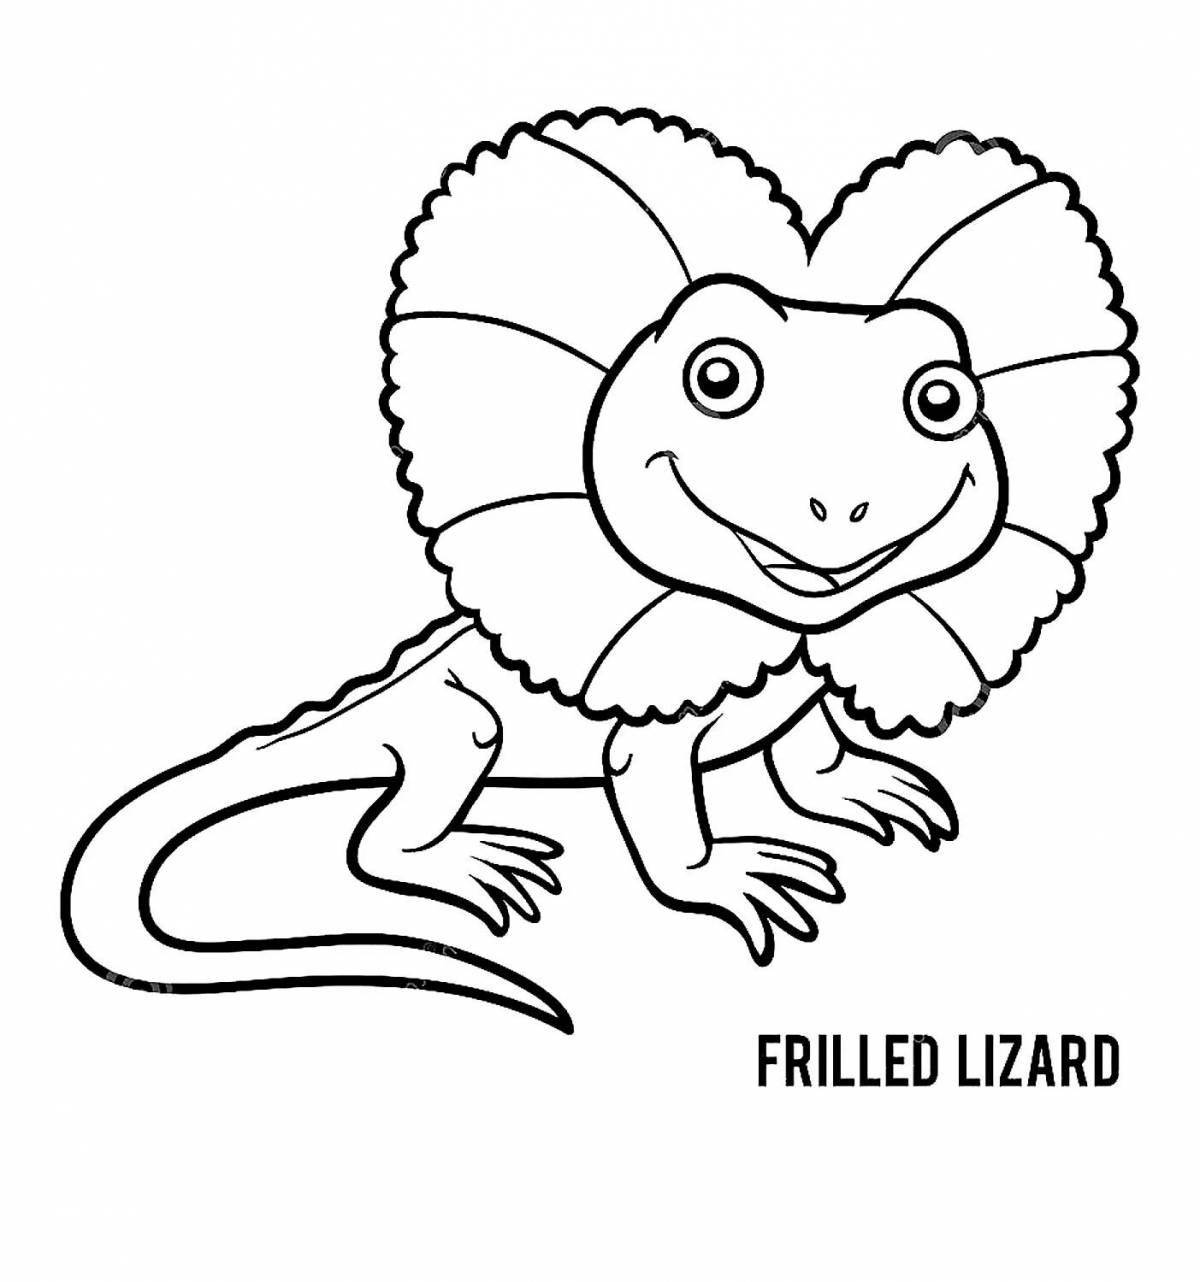 Impressive frilled lizard coloring page